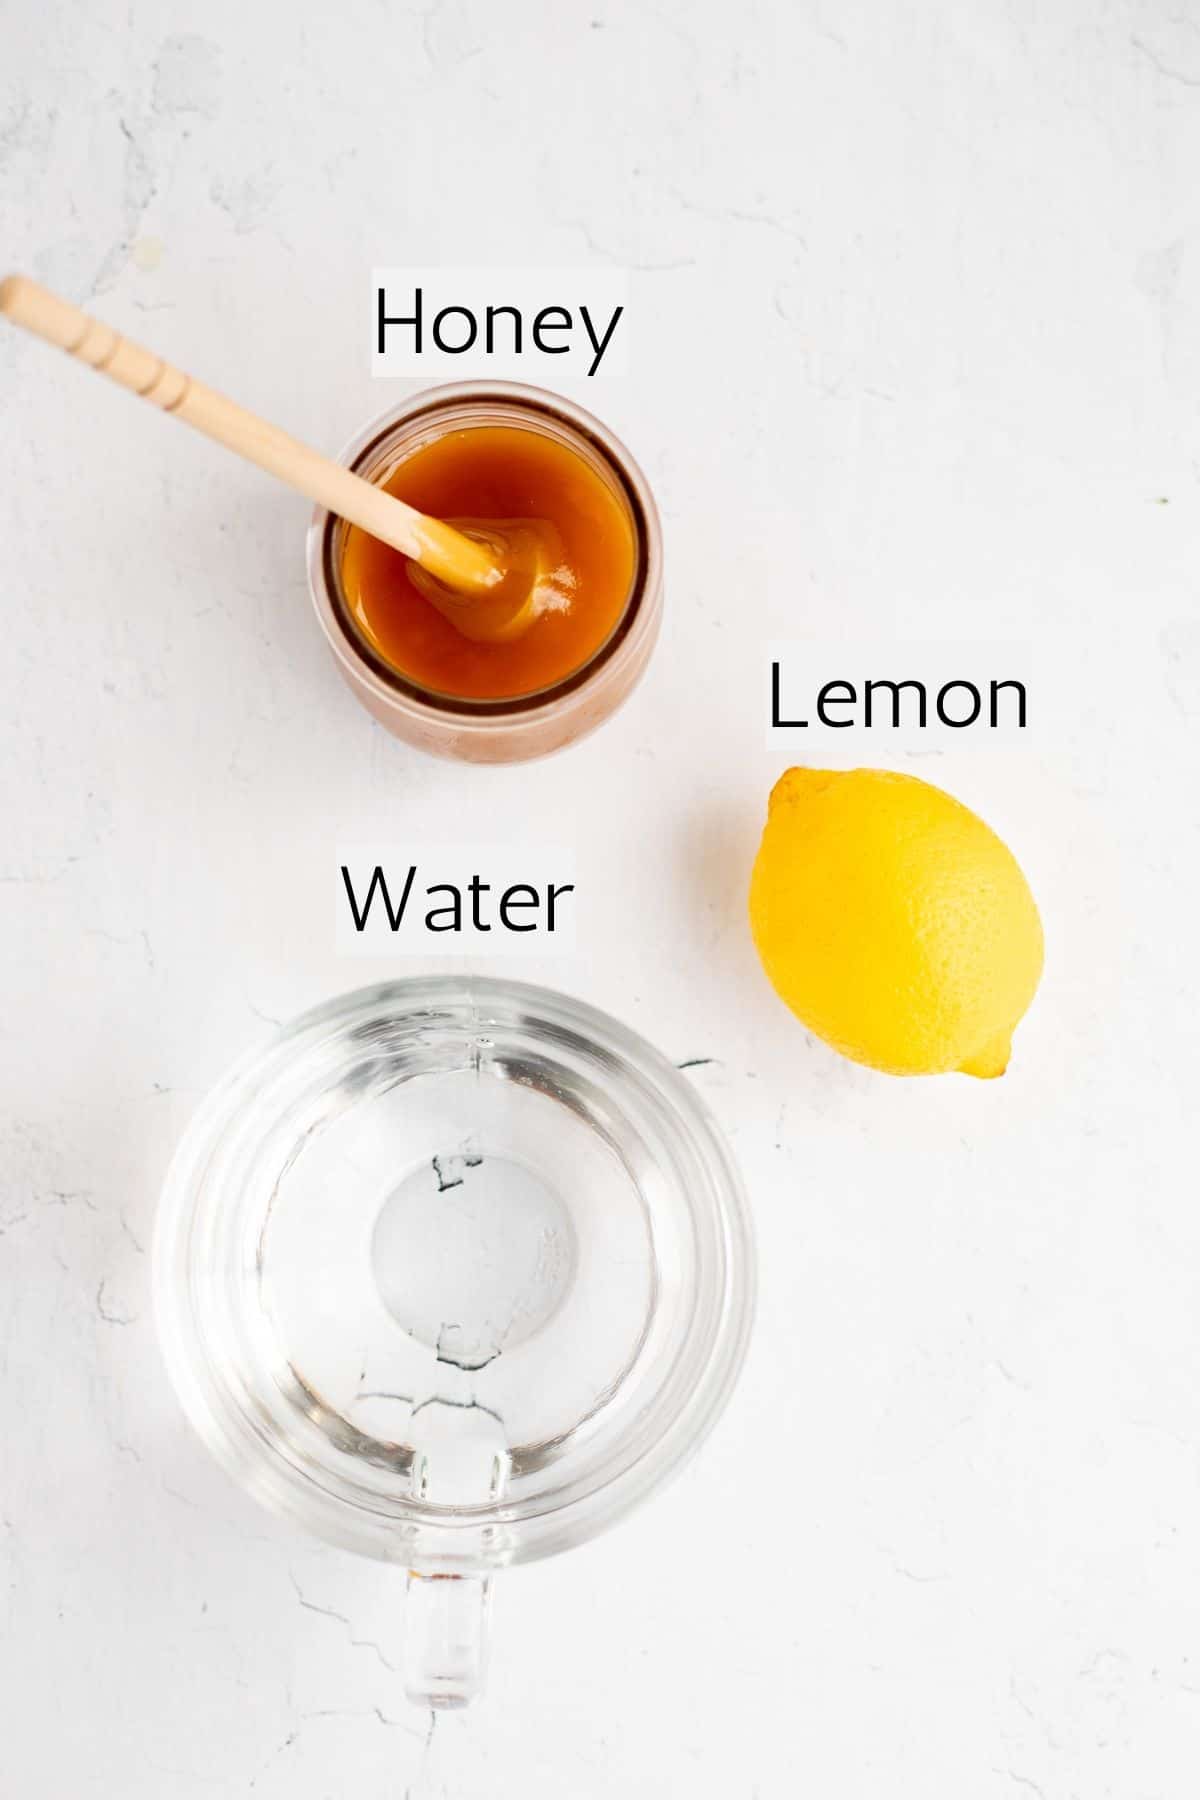 ingredients for honey lemon tea labeled with black text.